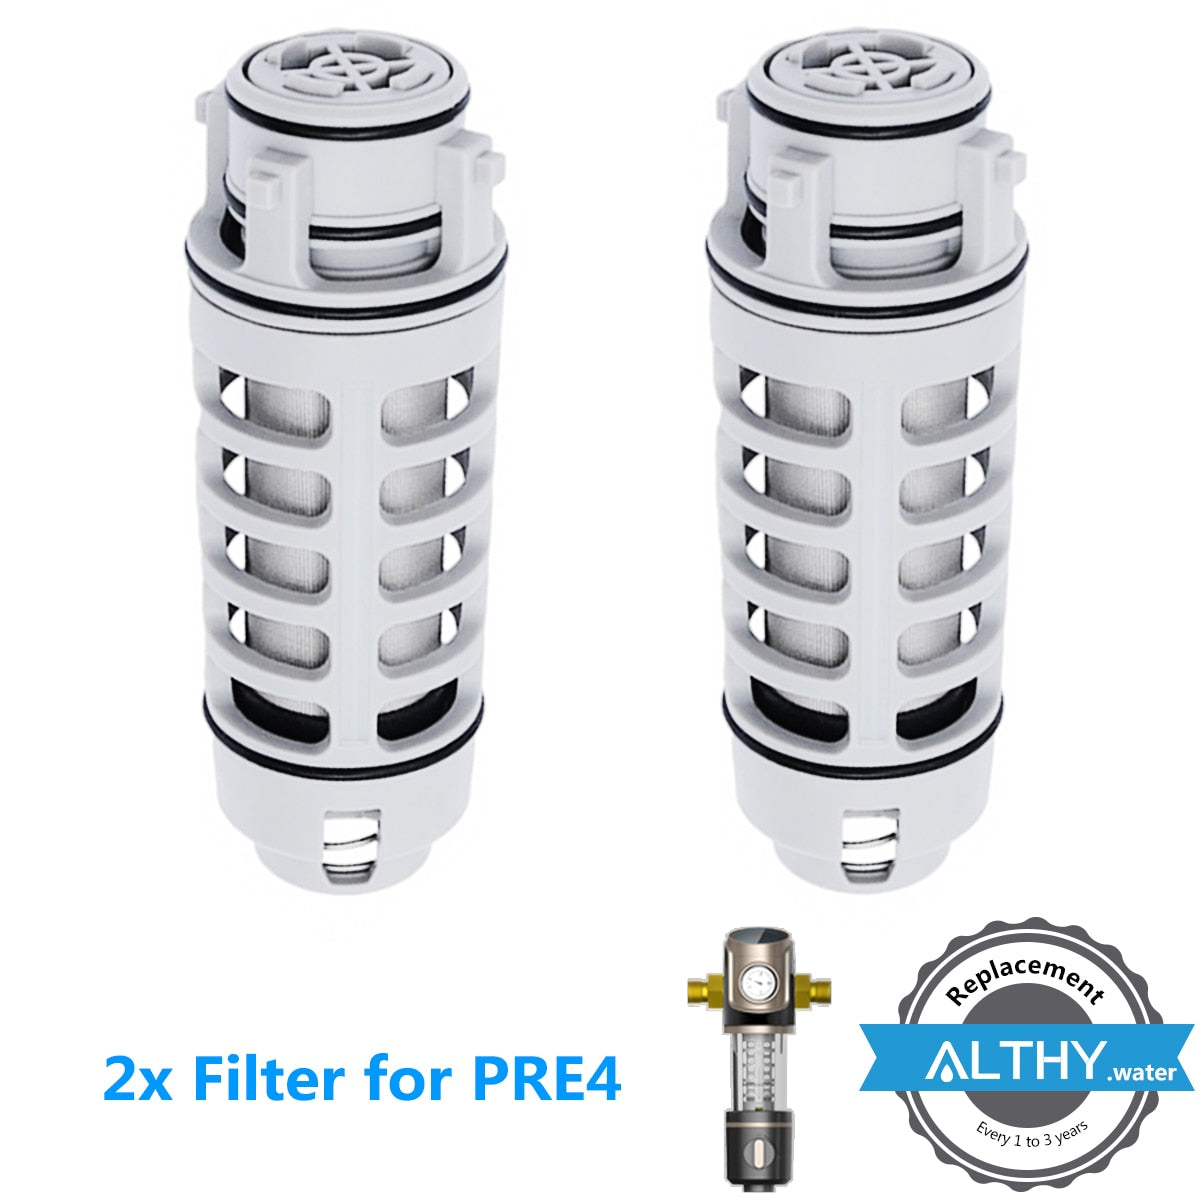 Backwash Water Filter Replacement For ALTHY PRE1 / PRE2 / PRE3 / PRE4 / AUTO2 Central Prefilter System Stainless Steel Mesh 2xfilterforPRE4China Hardware > Plumbing > Water Dispensing & Filtration 95.99 EZYSELLA SHOP